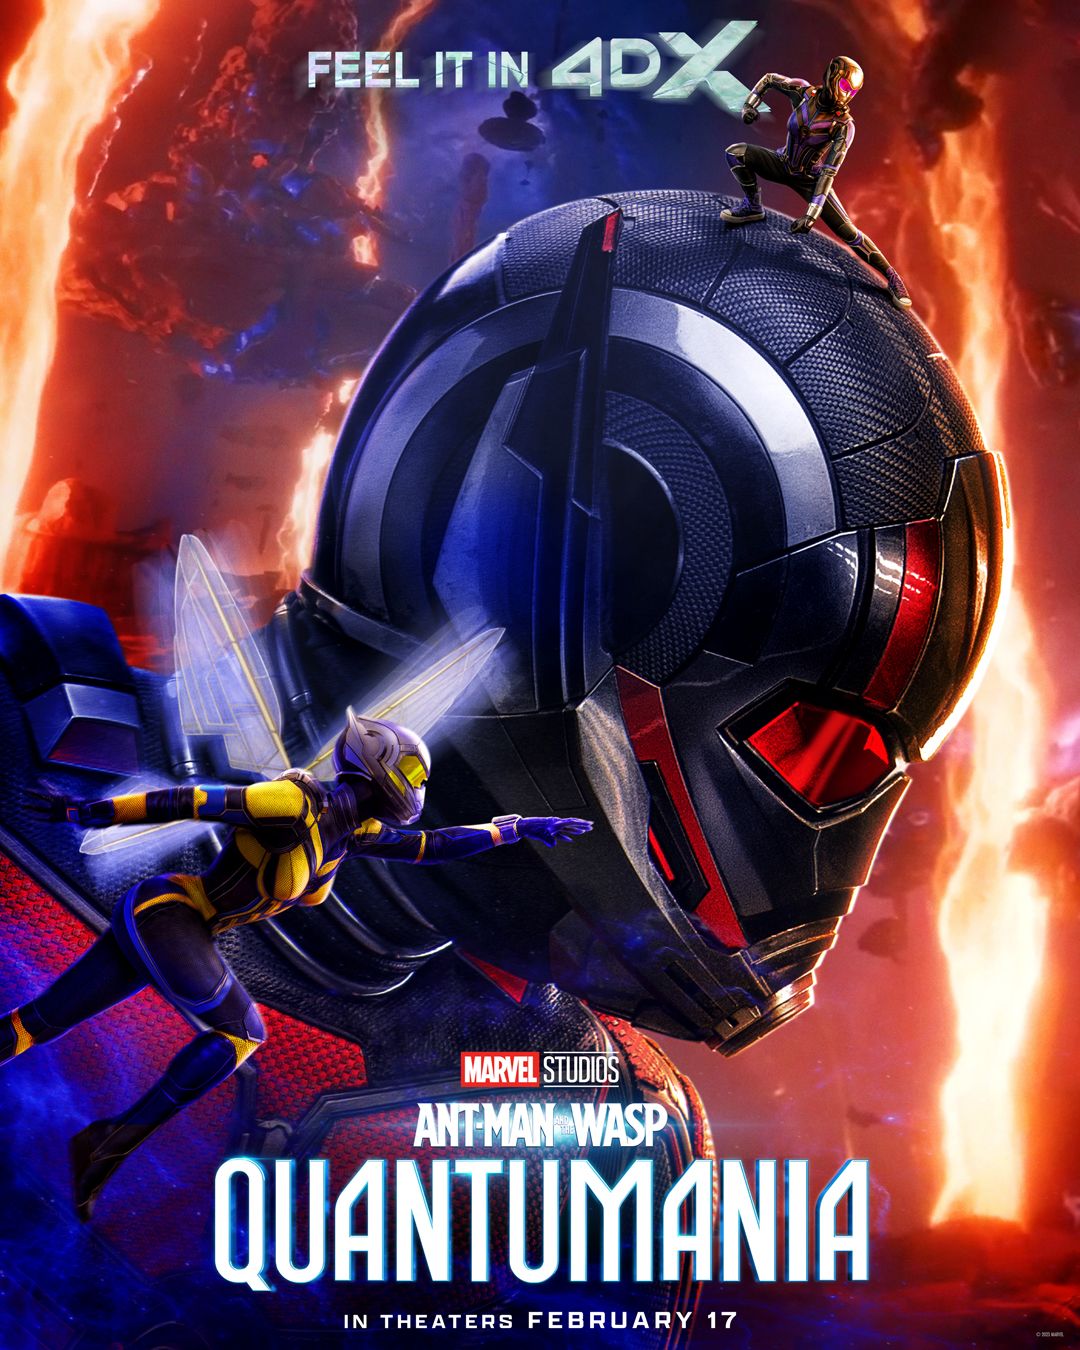 ant-man and the was quantumania 4dx poster